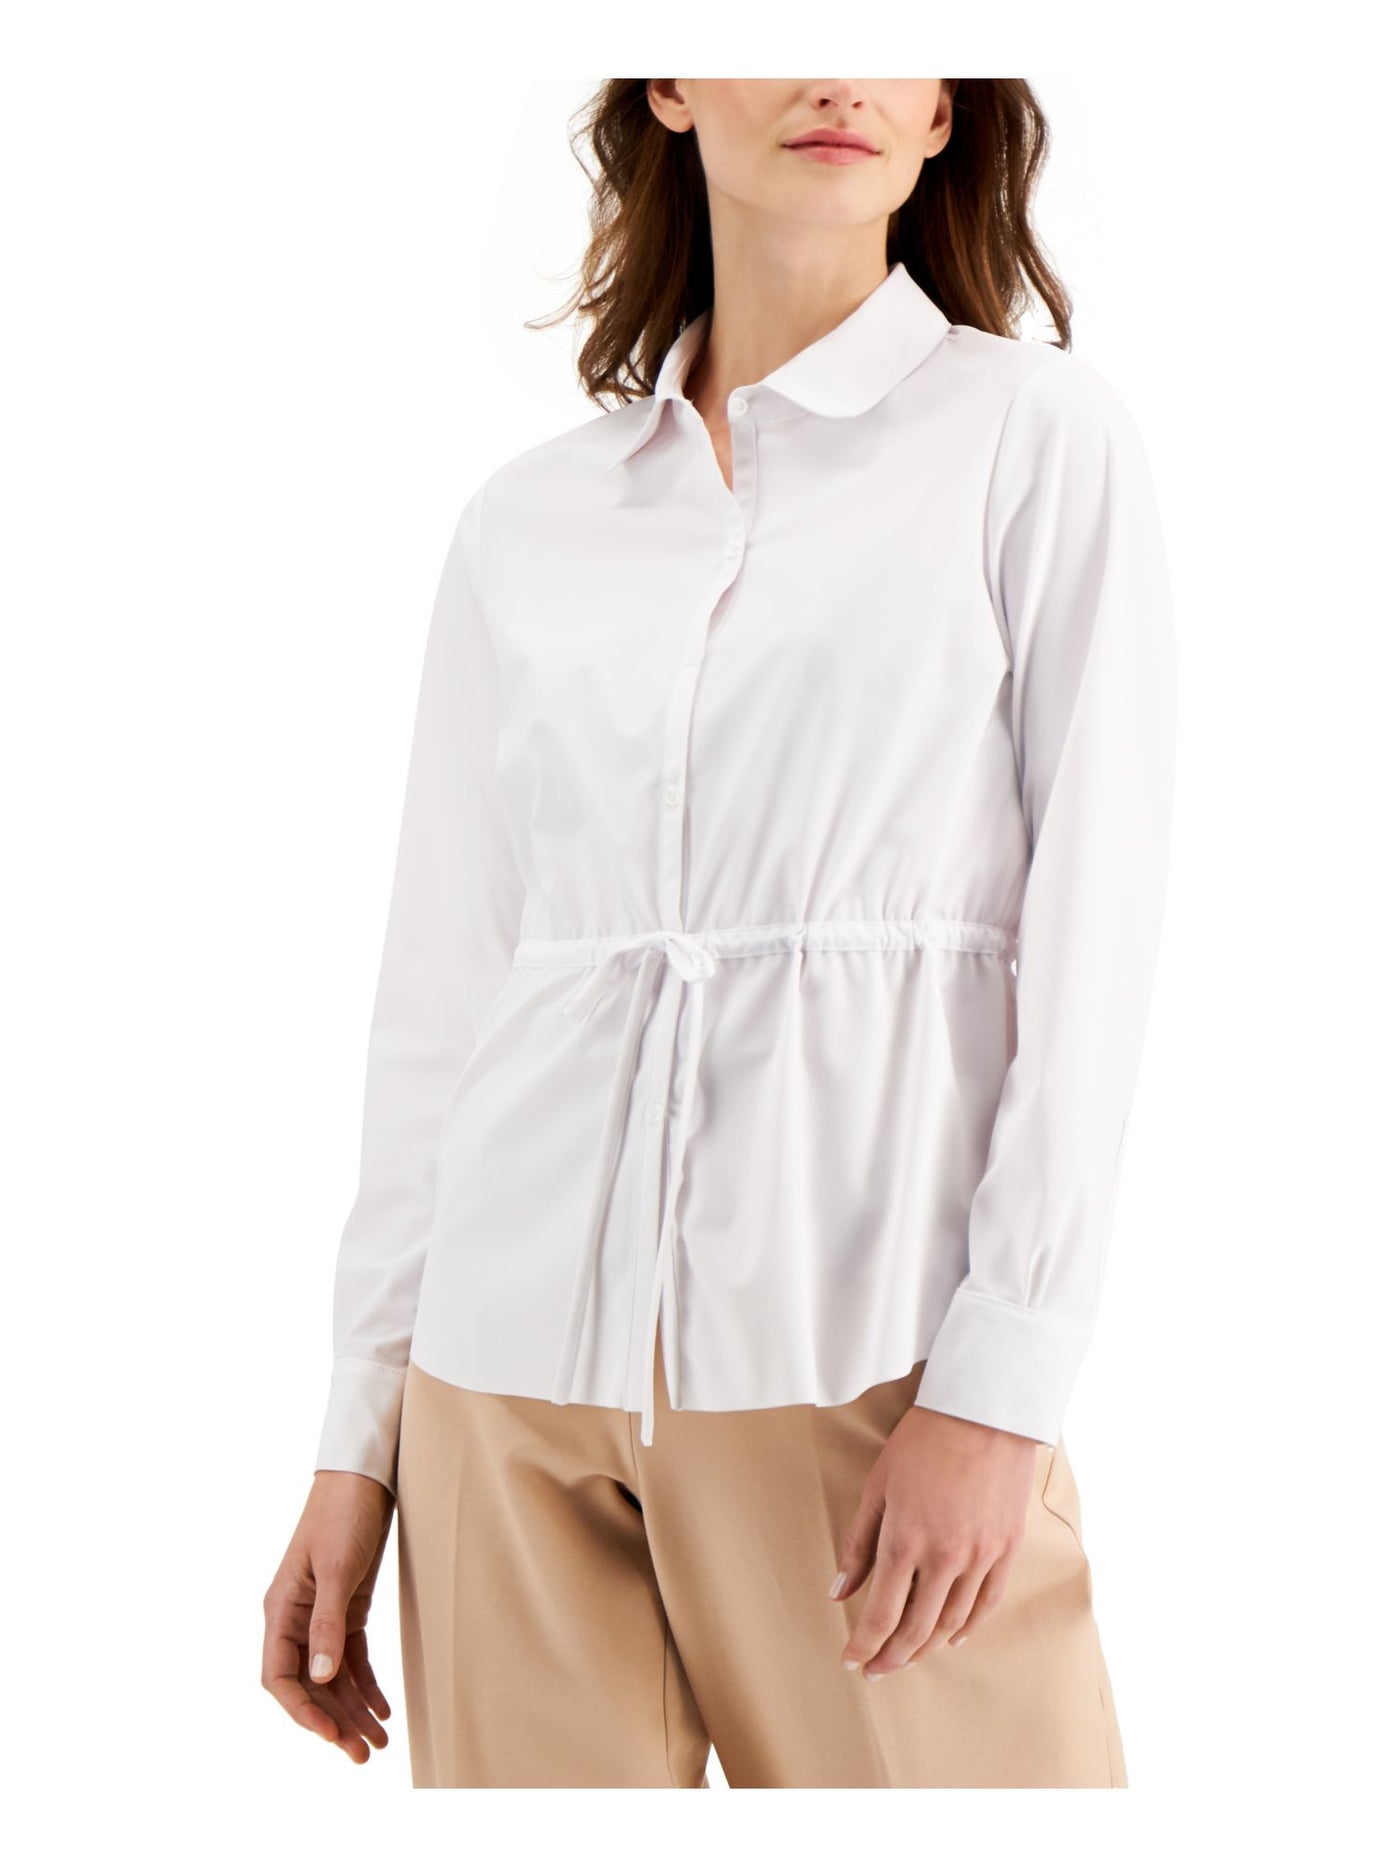 ALFANI Womens White Tie Cuffed Collared Wear To Work Button Up Top M